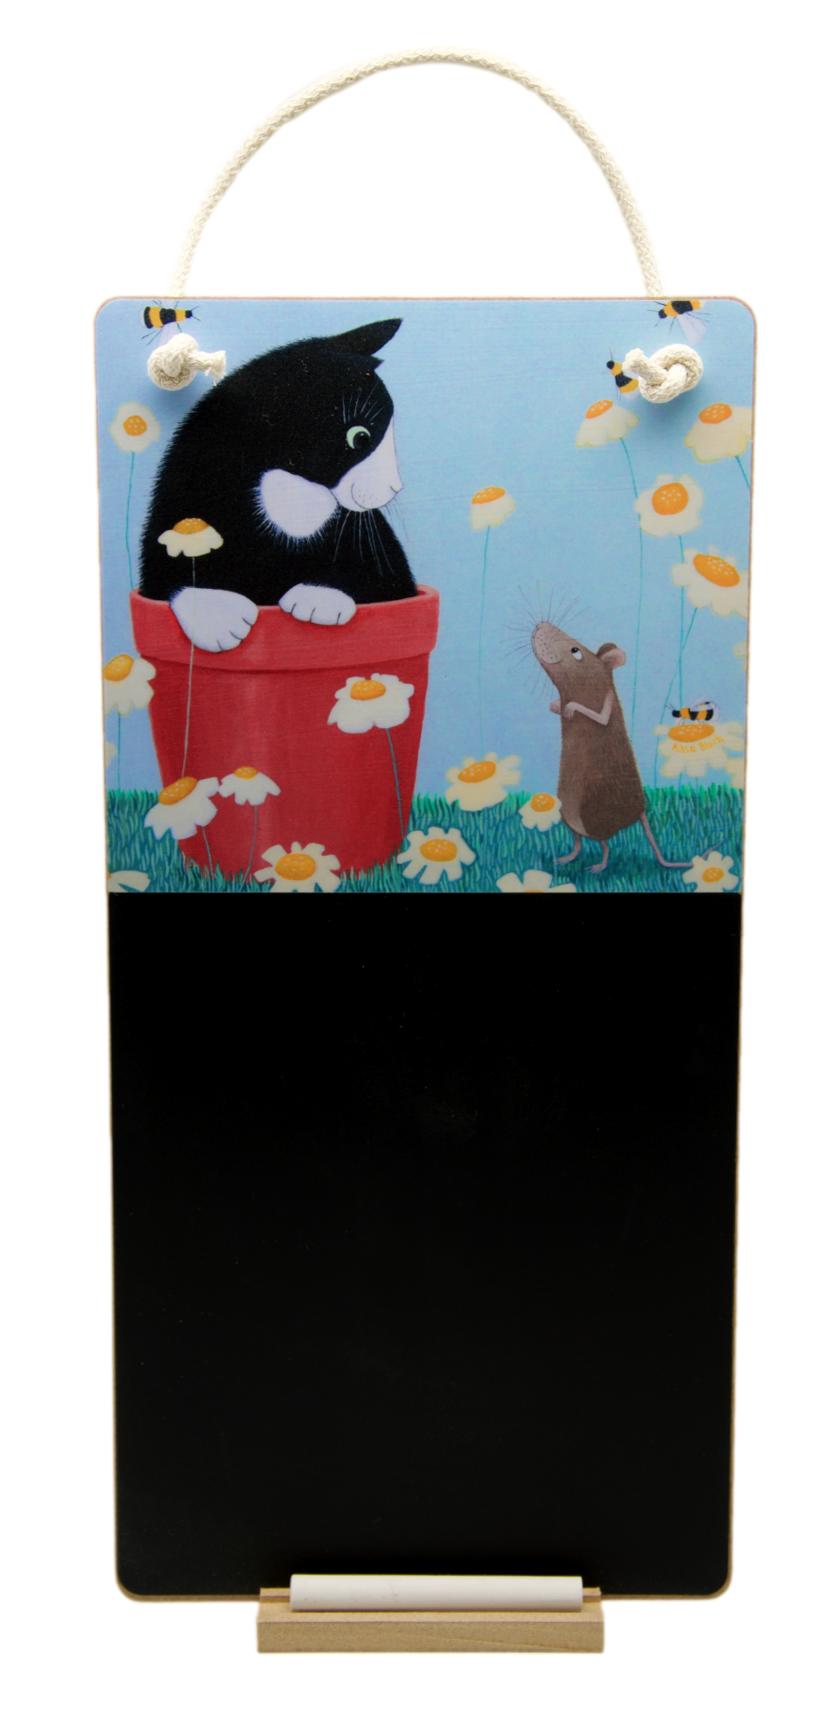 Daisy Games Cat Chalkboard & Chalk with Matching Coasters - Gift Set